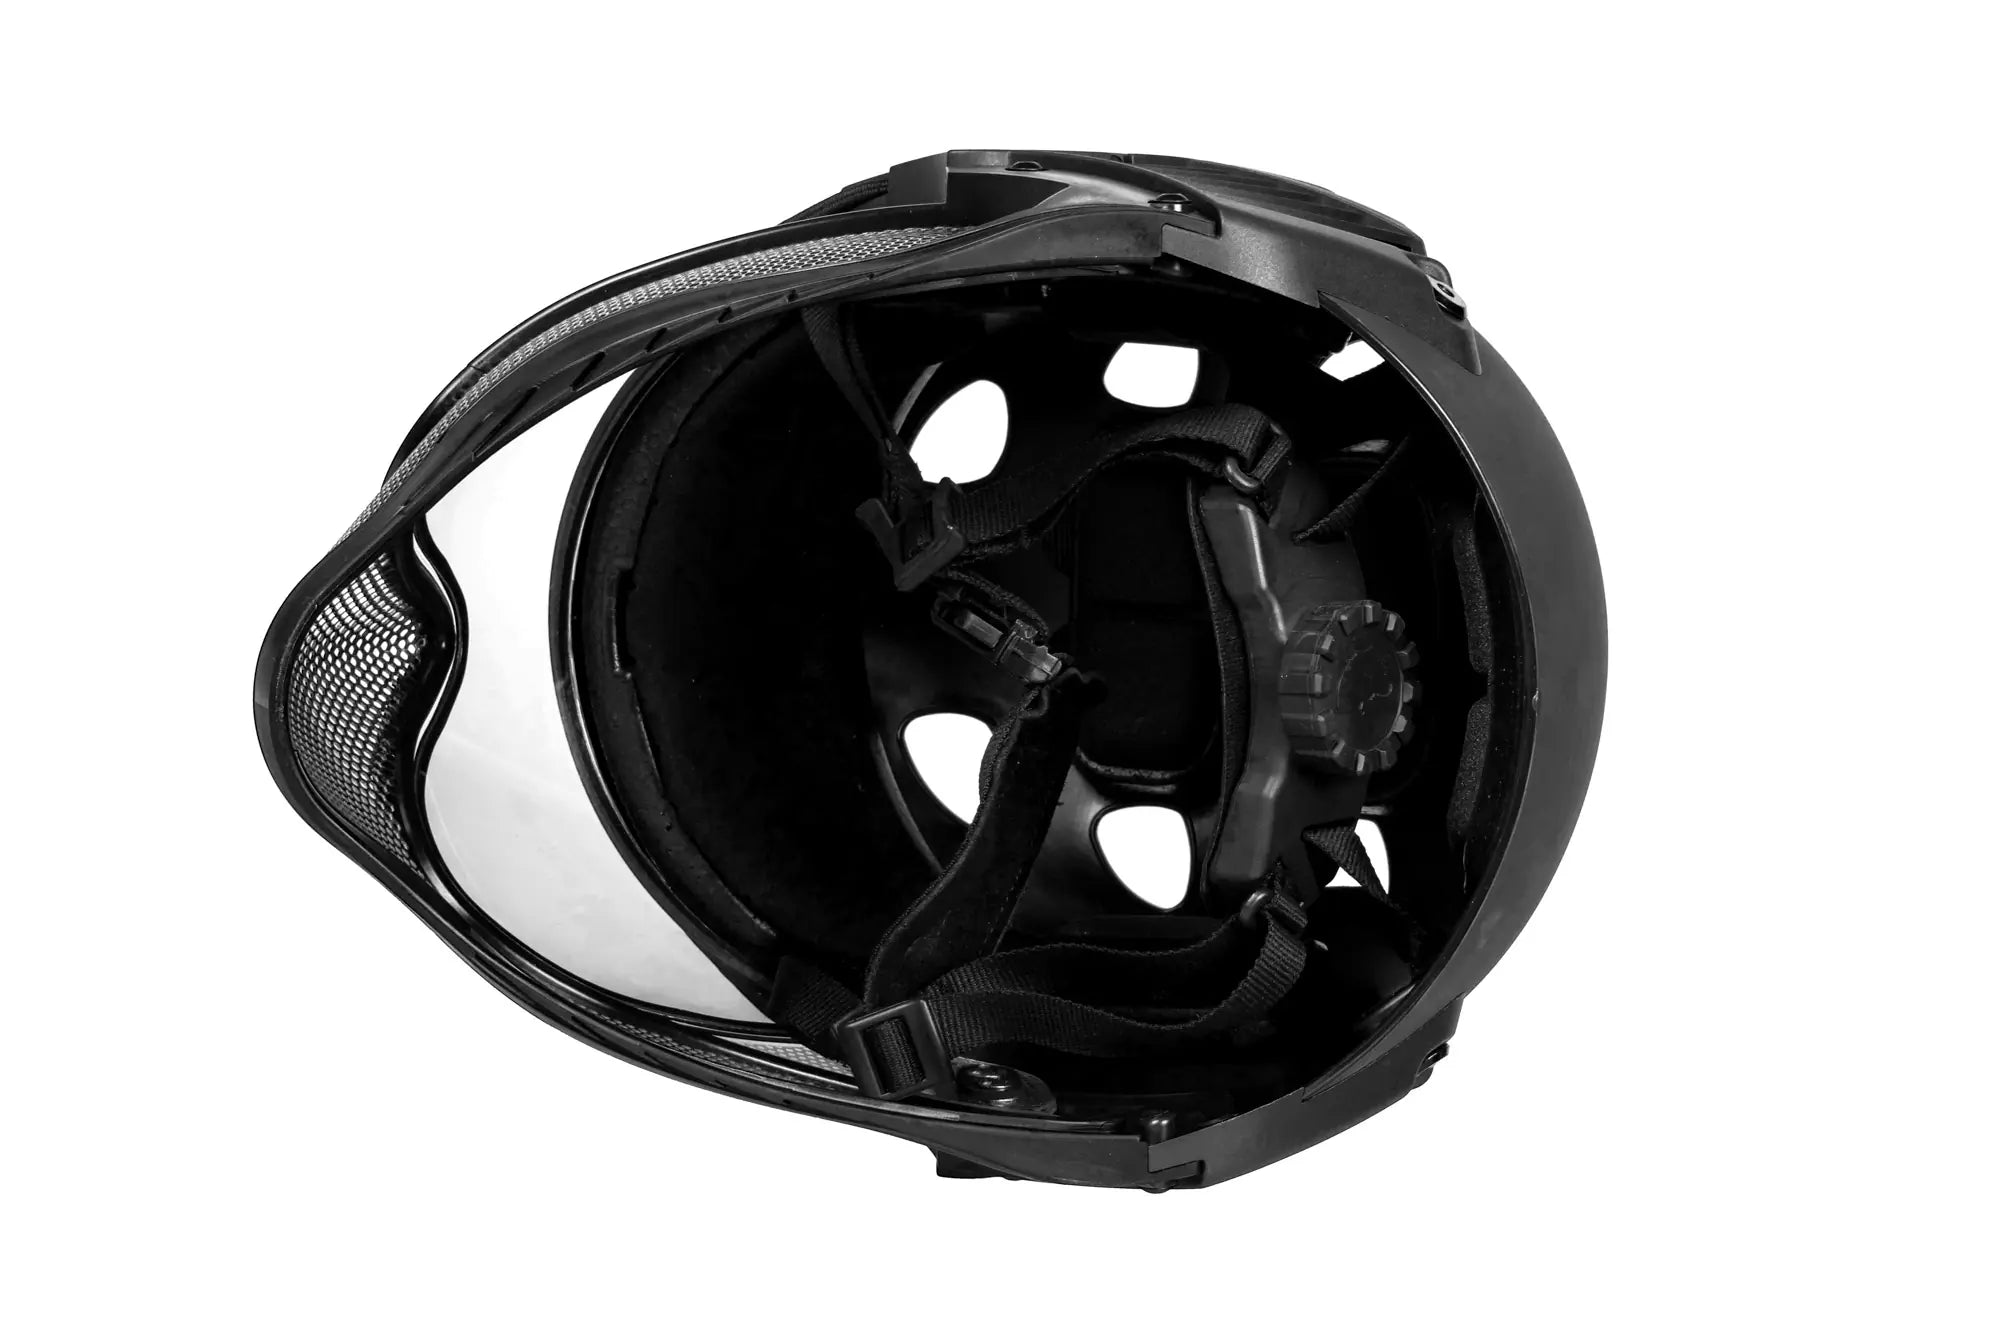 WARQ Full Face Protection Helmet System (Color: Black / Clear Lens)